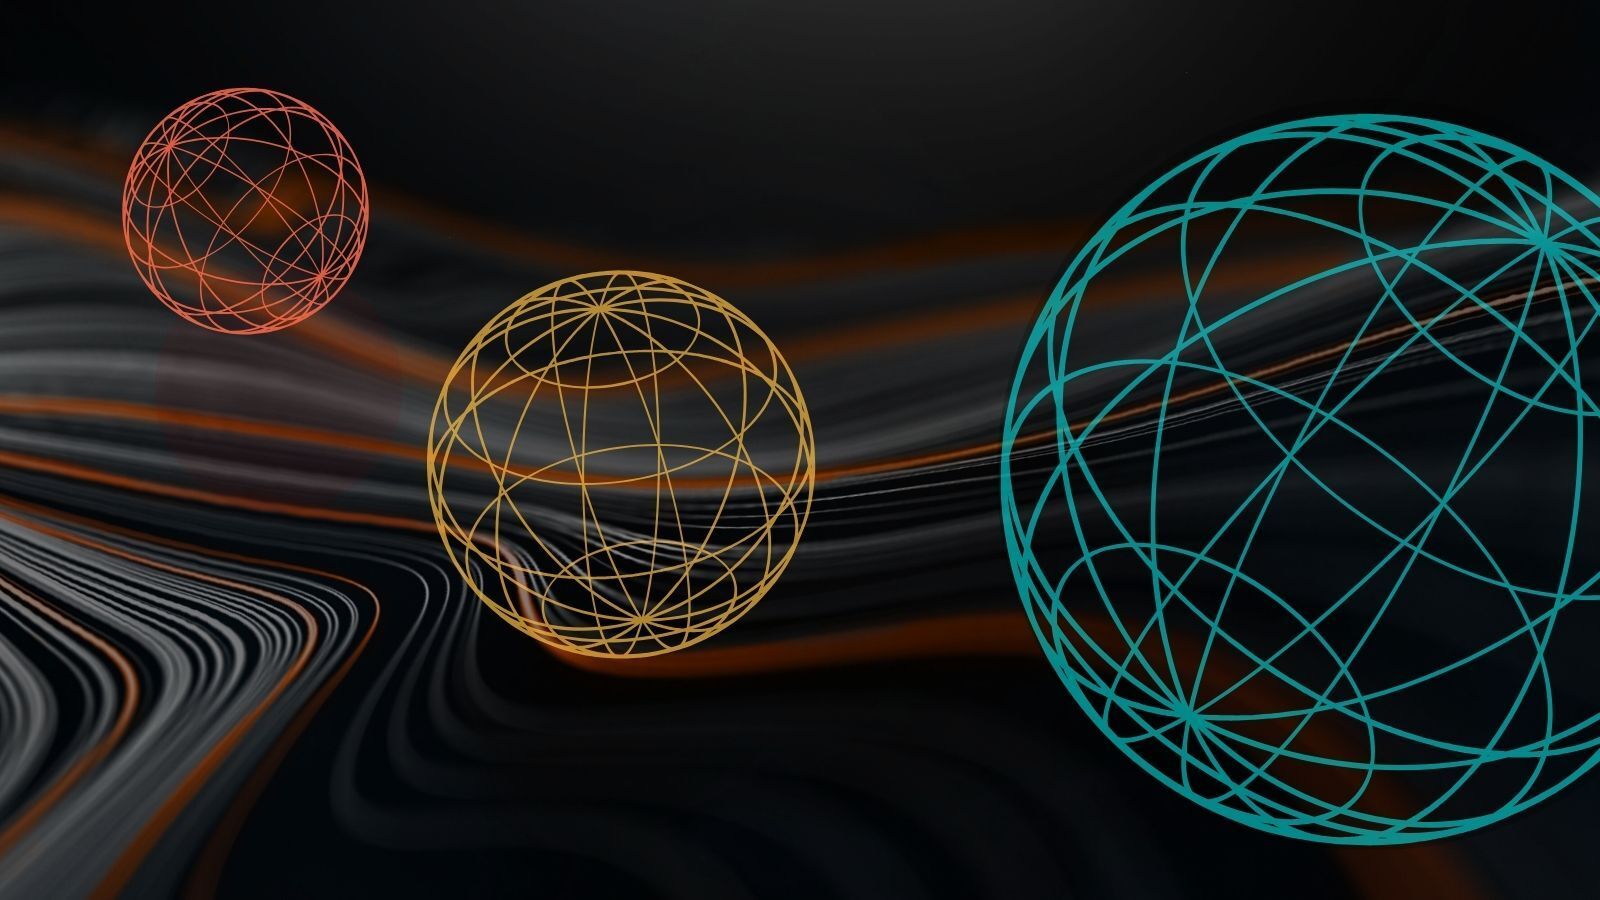 Abstract wallpaper with three colored wireframe spheres on a dark, rippling background, conveying a sci-fi mood